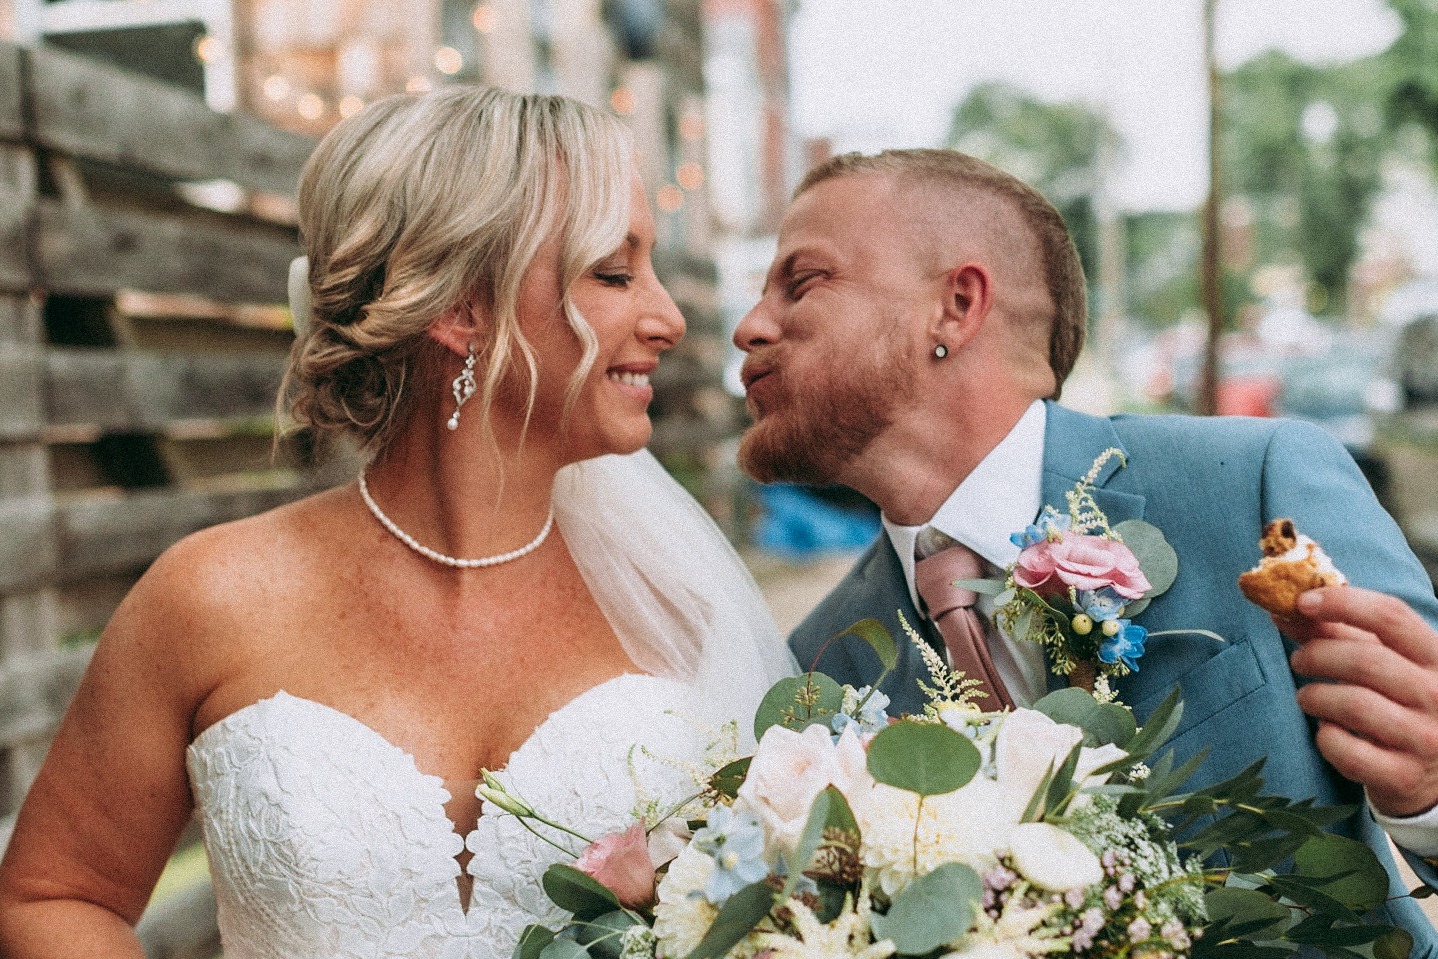 The Second Look: 5 Tips from Mason and Ashley's Look Back on Their Wedding Day